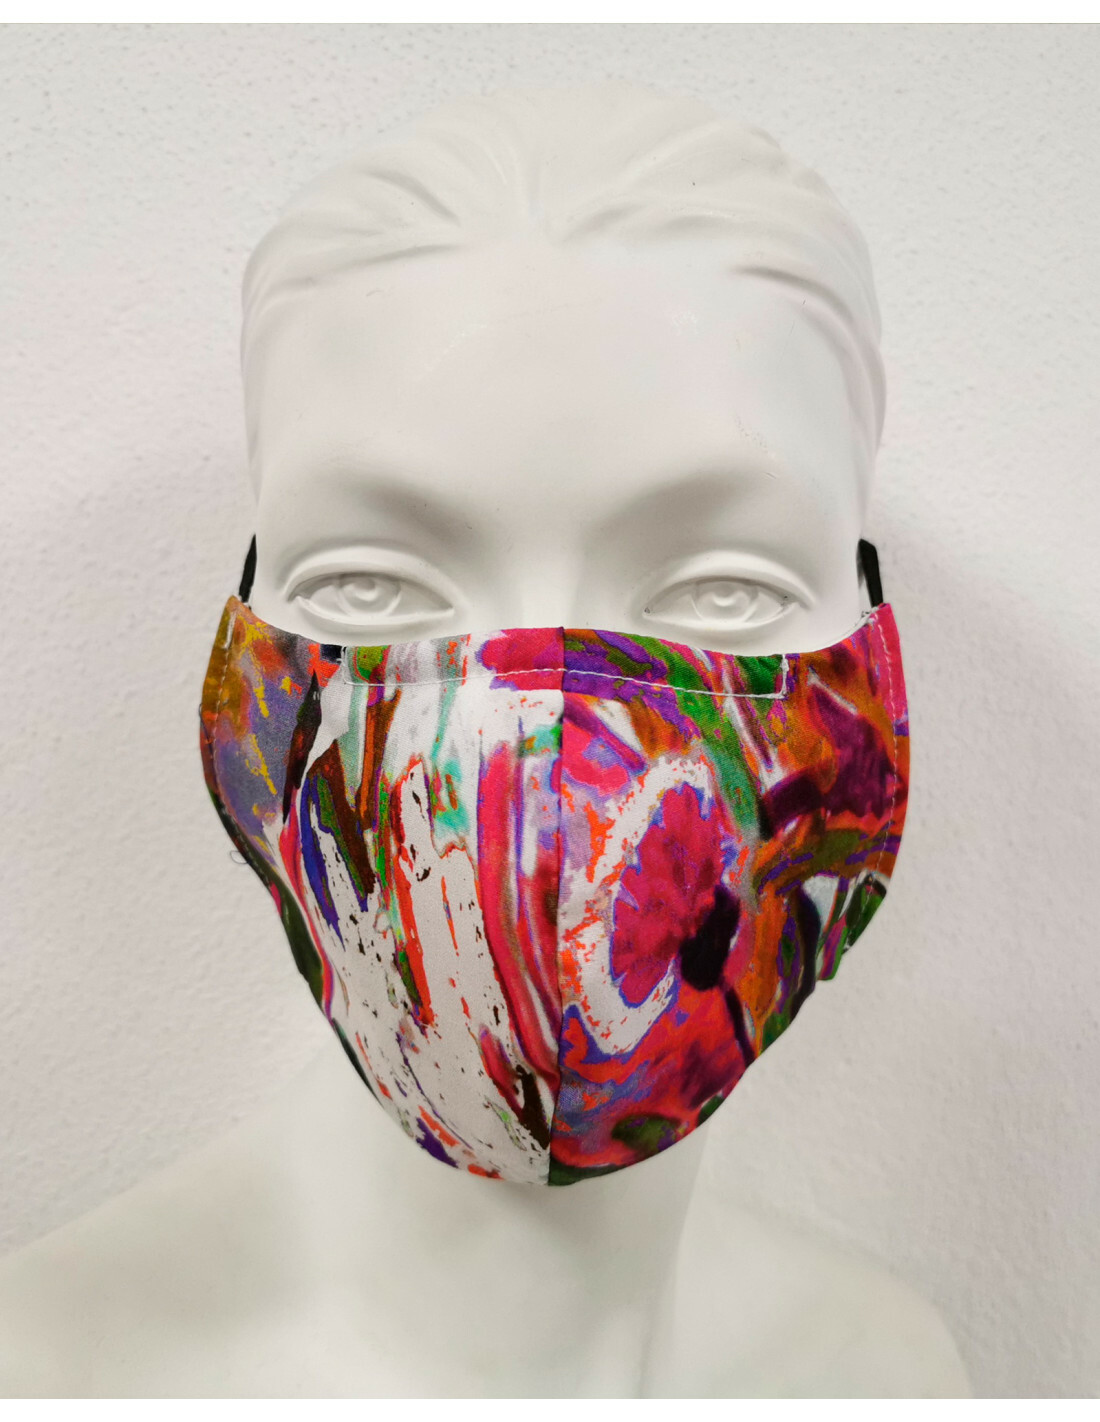 Maloka: Colors Of Picasso's Abstract Art Protective Masks 1, 2 & 3-Pack (More Colors, With Filter!)